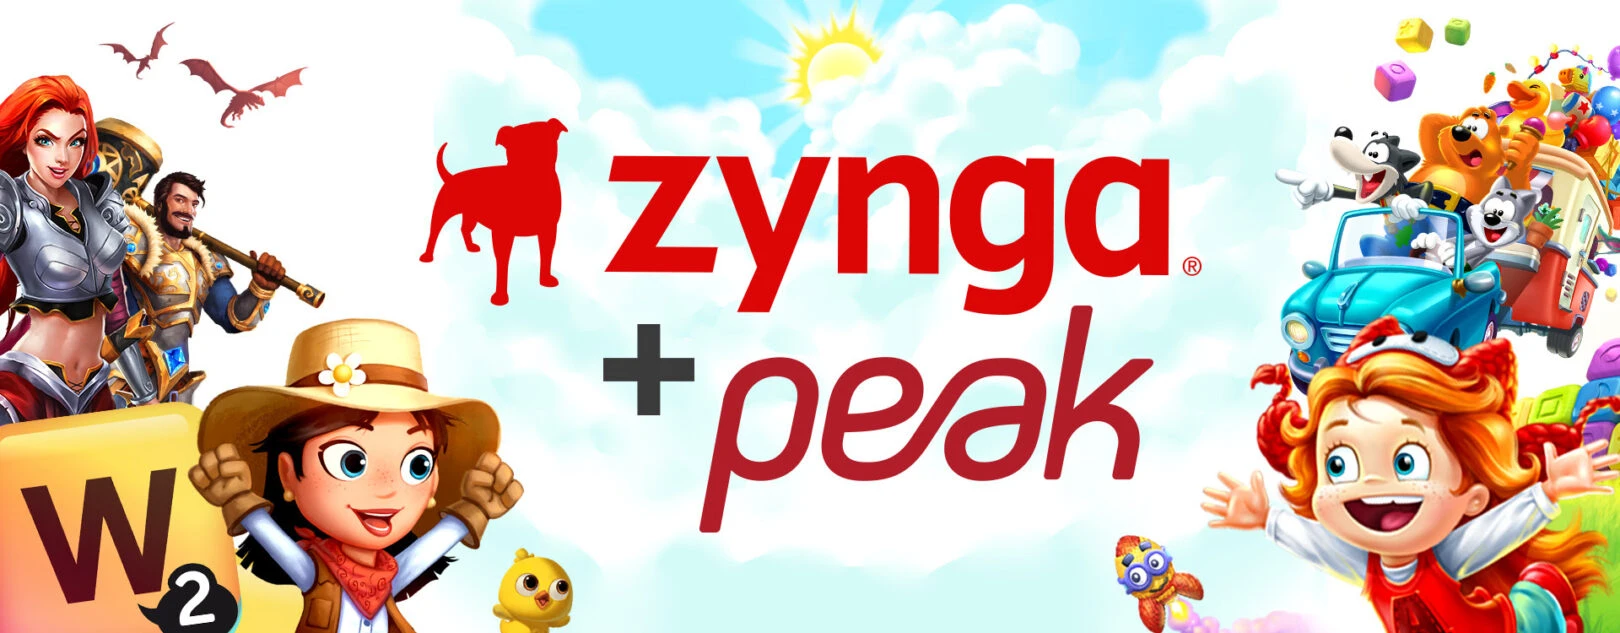 Peak Games acquired by Zynga for $1.8 billion